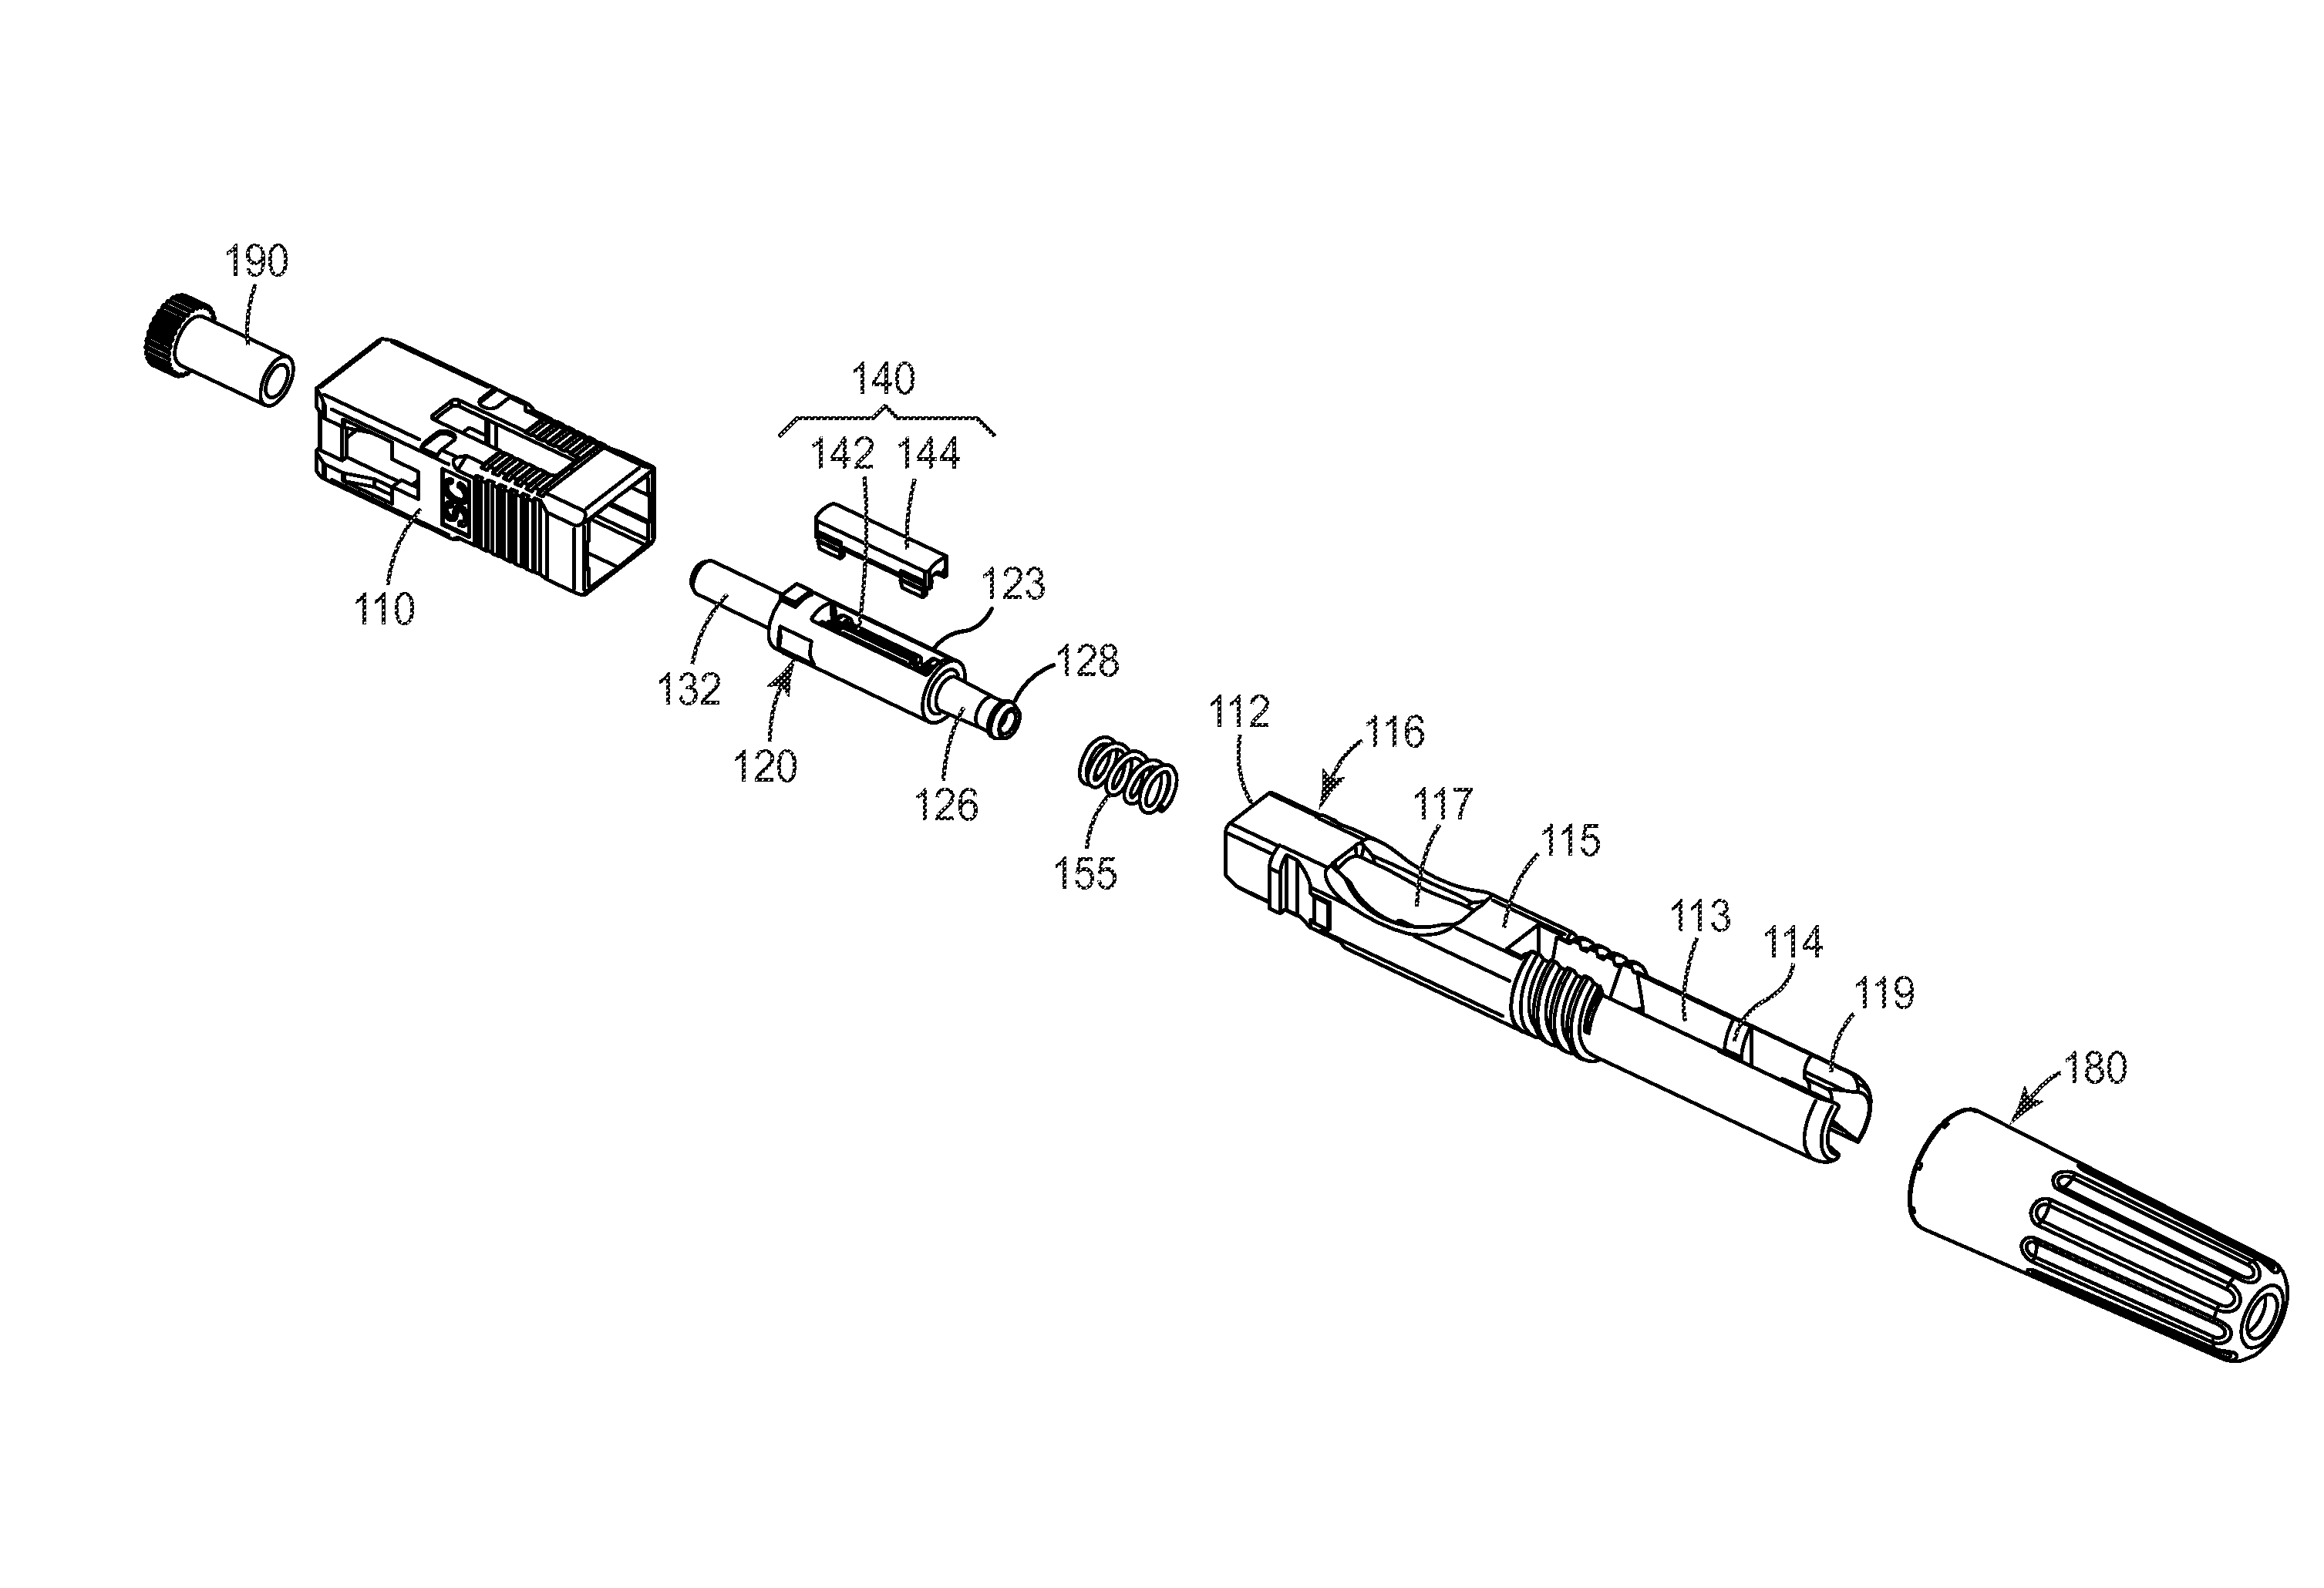 Field terminable optical fiber connector with splice element